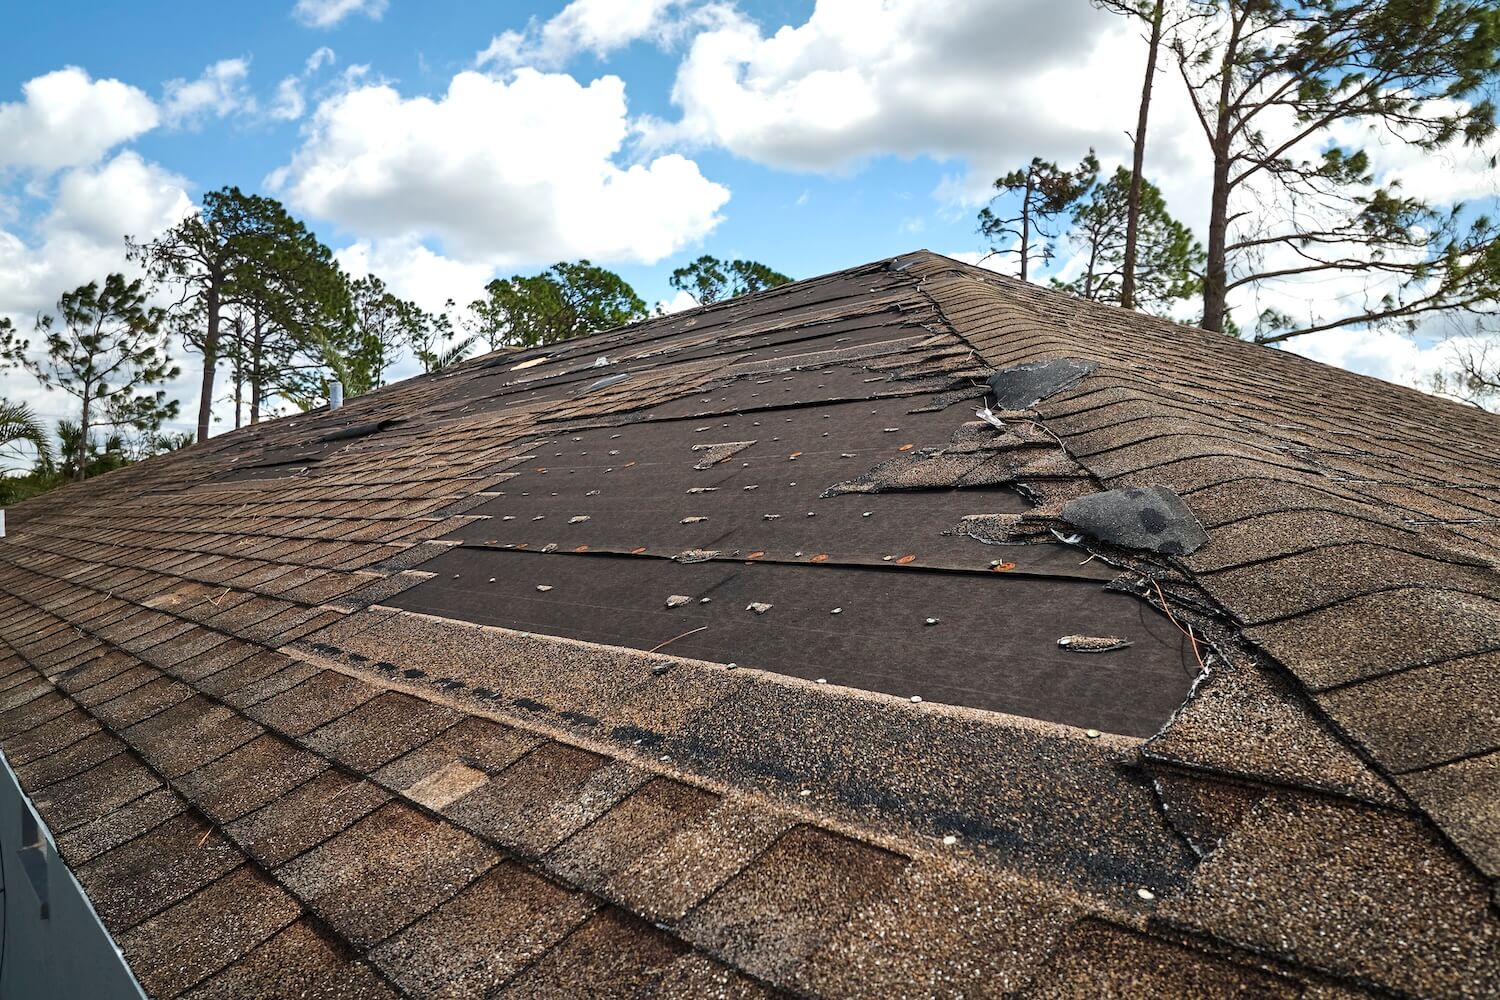 Roofing Insurance Understanding How To File Claims For Roof Damage